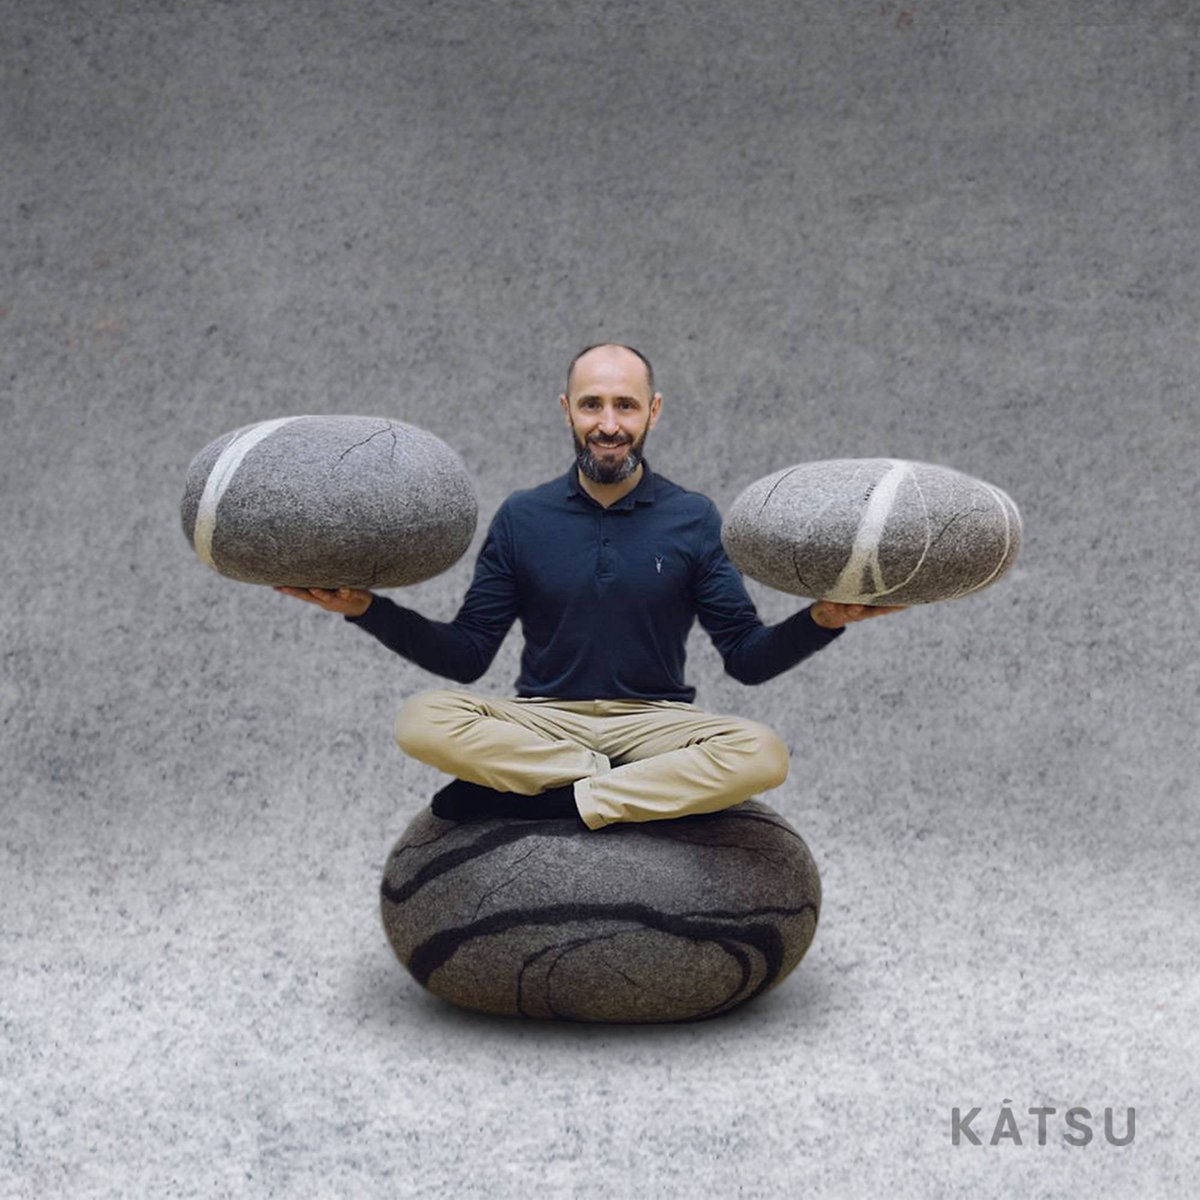 Give me matter and movement and I will create the world. Rene Descartes.  #Katsu #ottomanpouf #footstool #pouf #ecofriendly #Trinity #zen #homedesign #Miami #forhome #feltedpouf #natural #wool #unusual  #relaxing  #sofa #minimaldesign